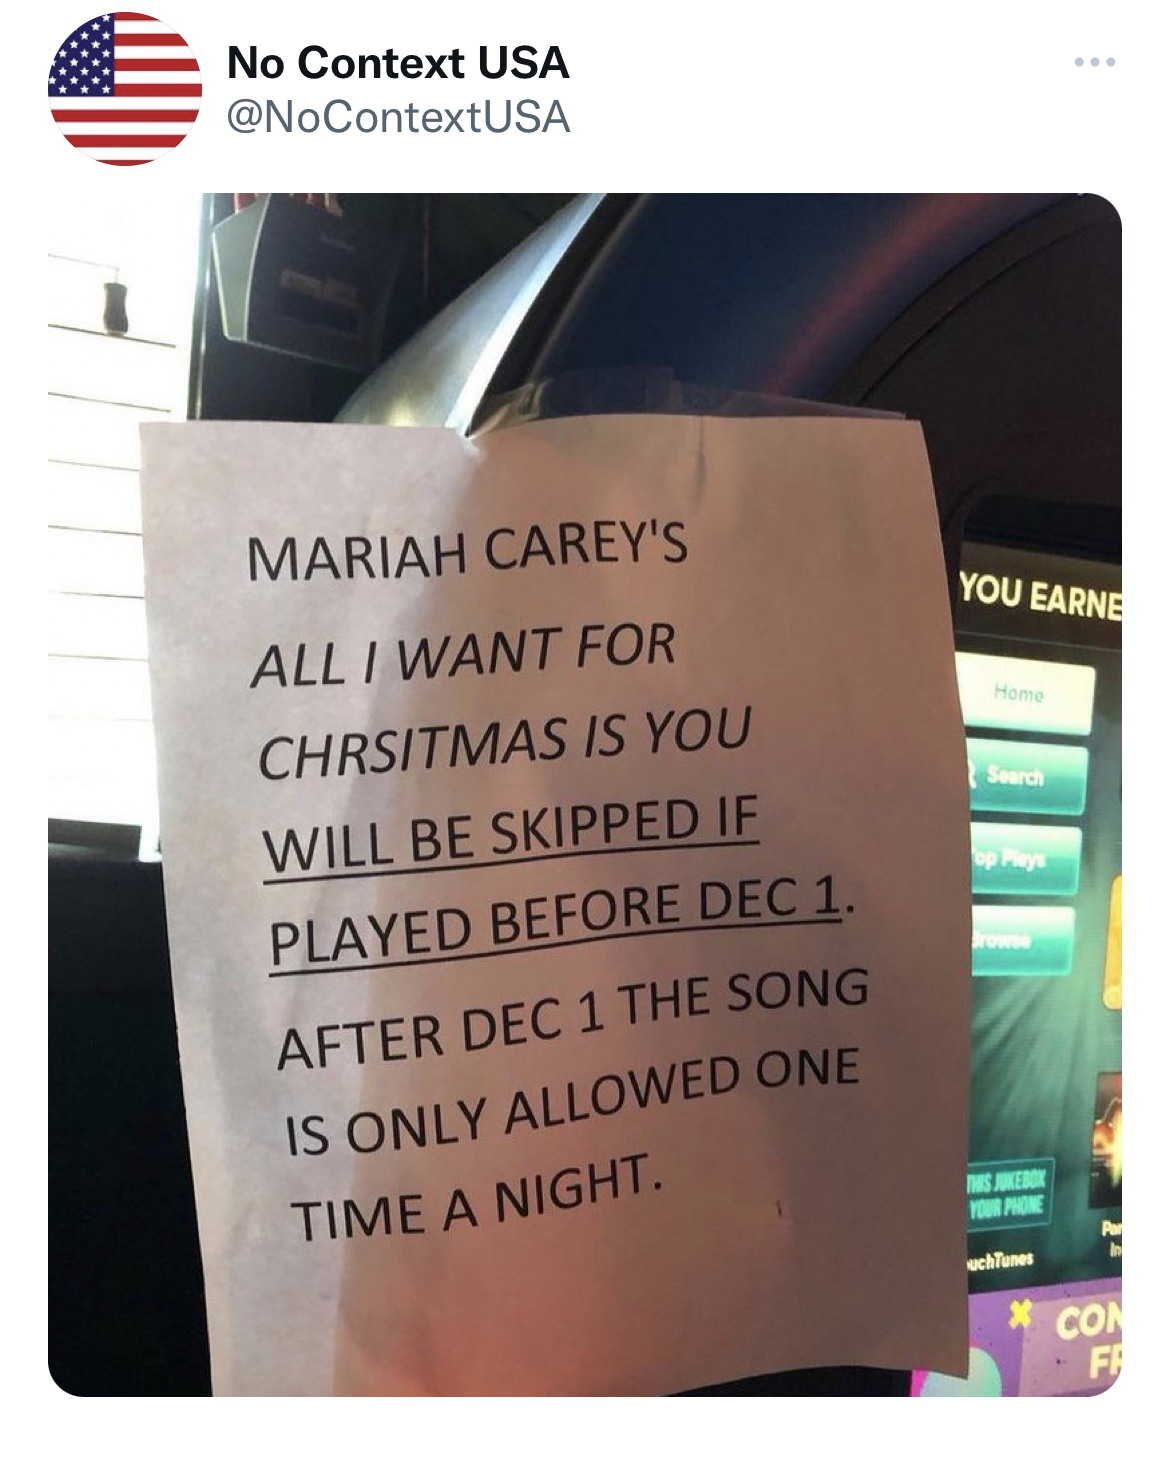 Tweets Roasting Celebs - No Context Usa Mariah Carey'S All I Want For Chrsitmas Is You Will Be Skipped If Played Before Dec 1. After Dec 1 The Song Is Only Allowed One Time A Night. You Earne kom Con Fr